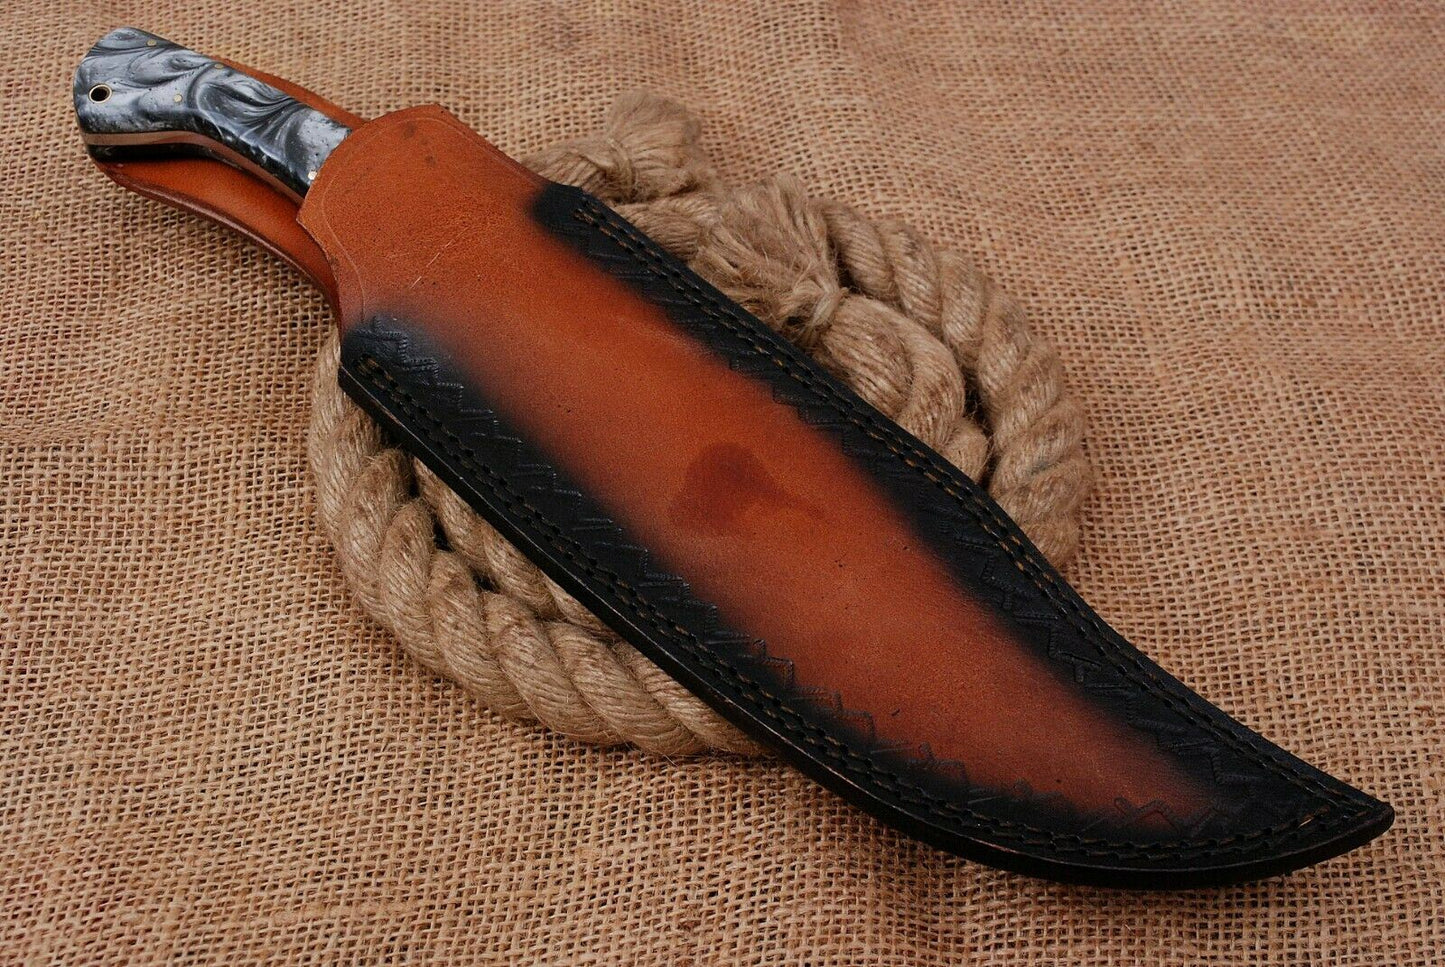 15" Custom Hand Forged Railroad High Carbon Steel Cleaver Knife (741)